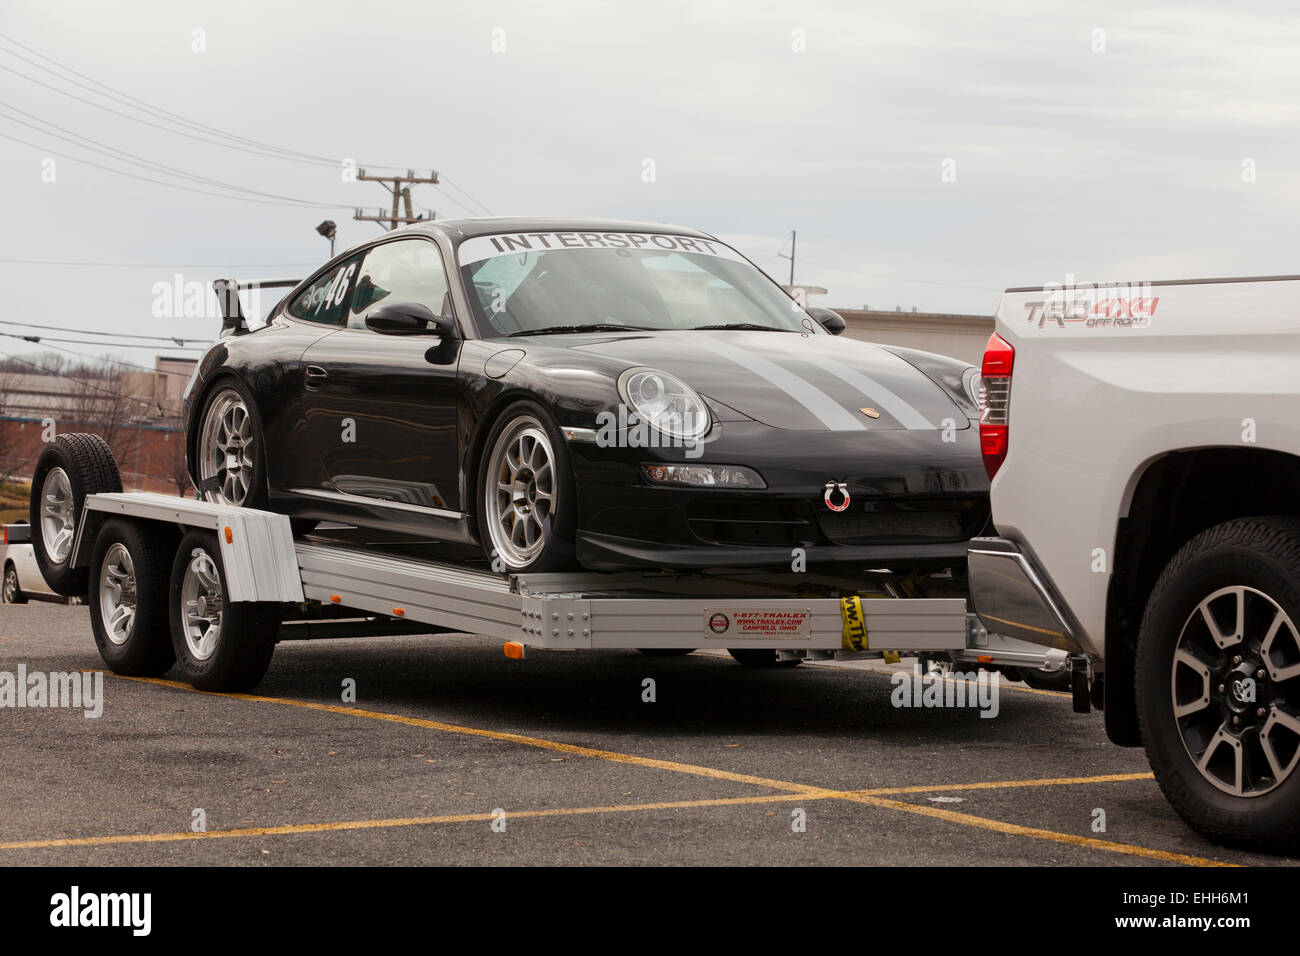 Towing your Porsche with a U-Haul Auto Transport trailer [w/video